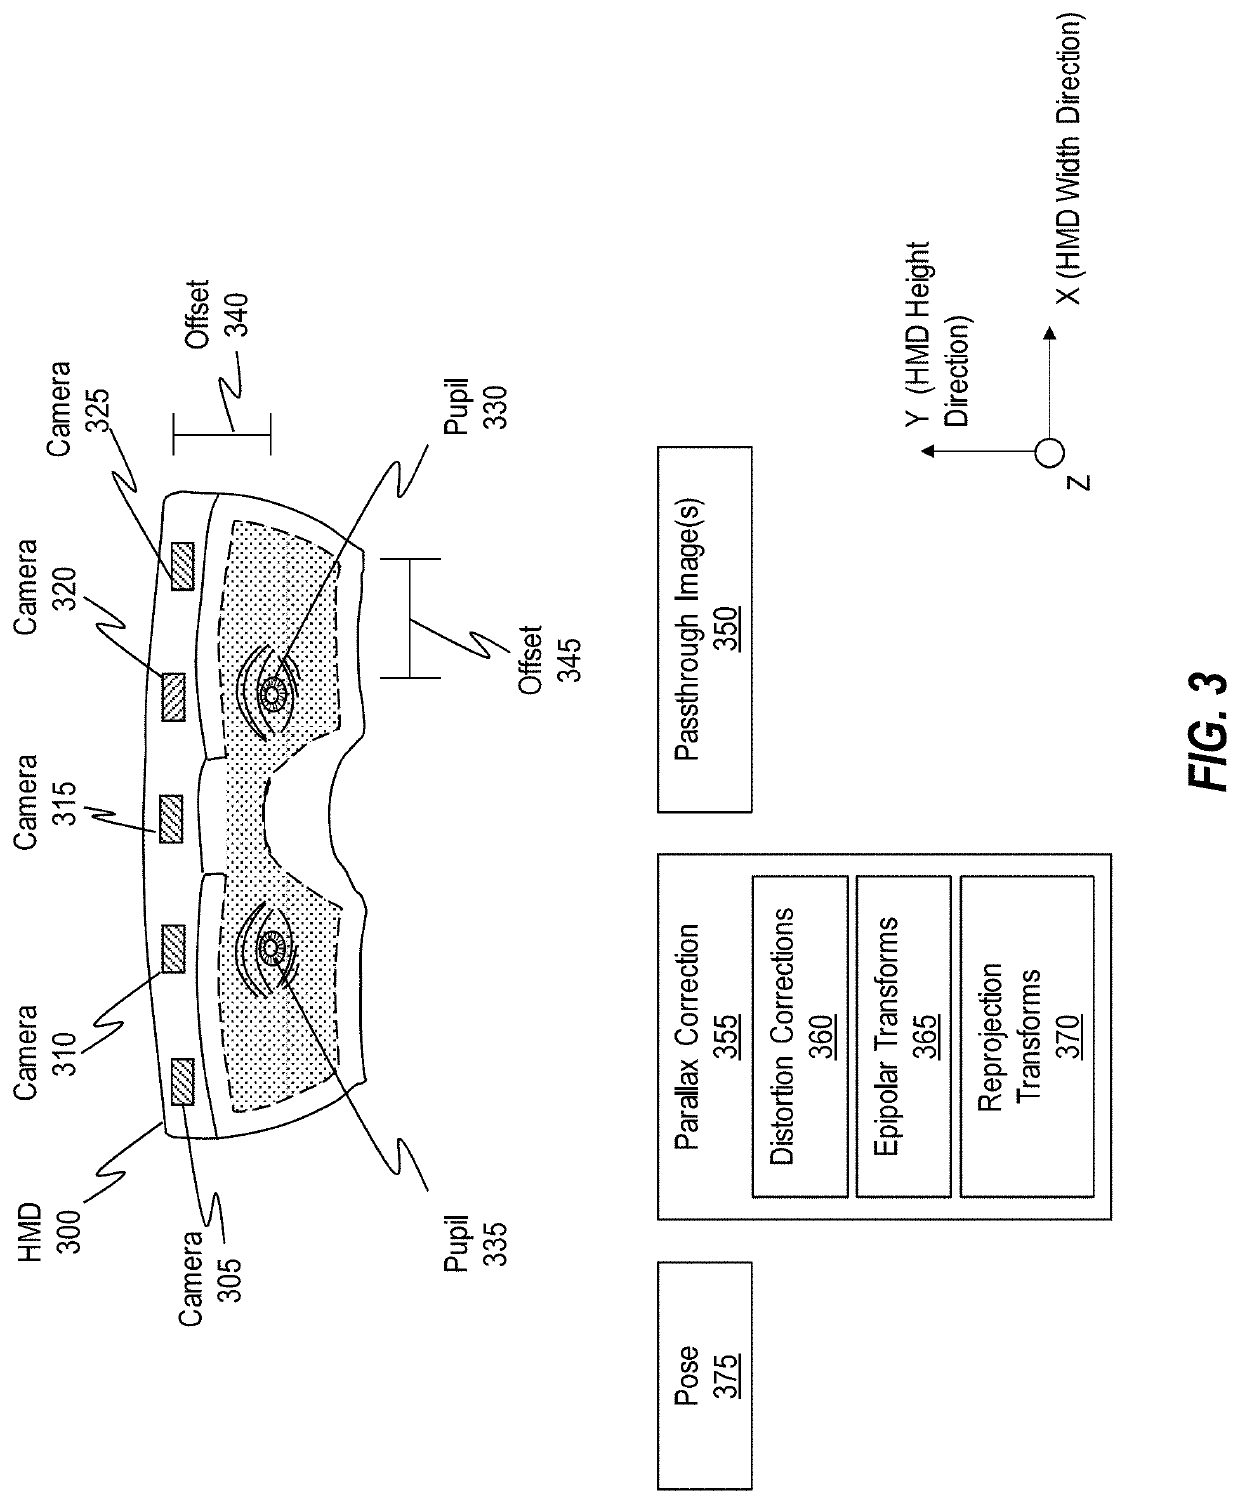 Systems and methods for temporally consistent depth map generation